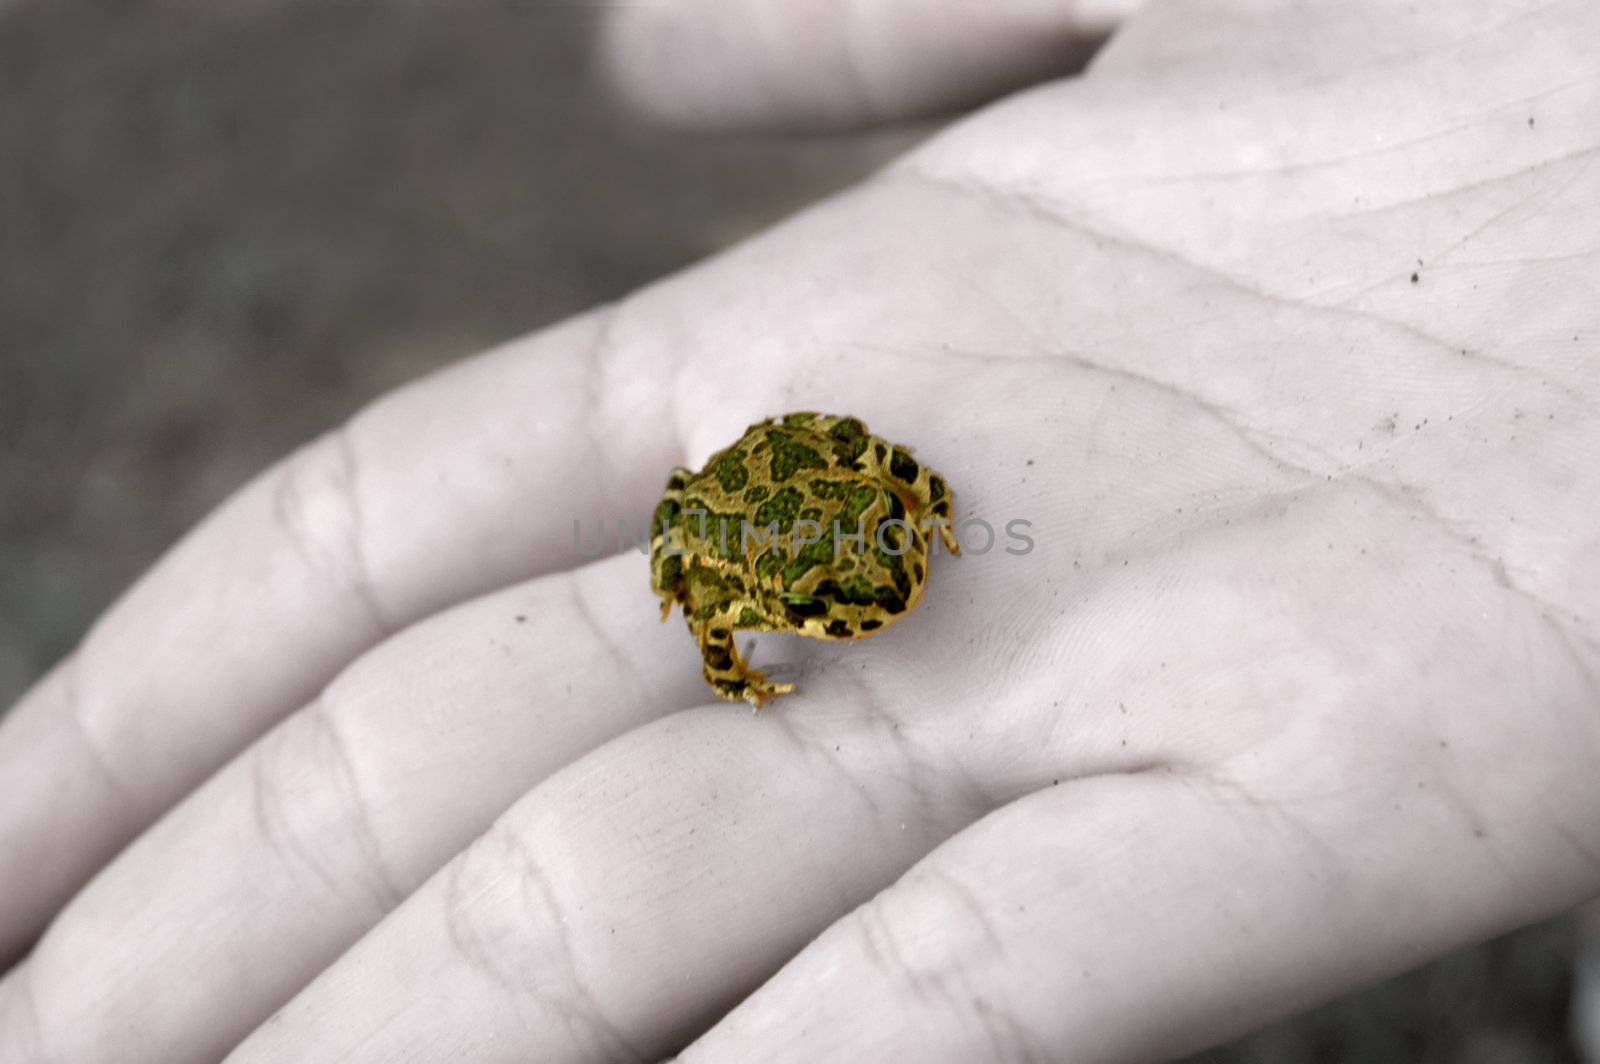 A little green frog in the palm of female hand